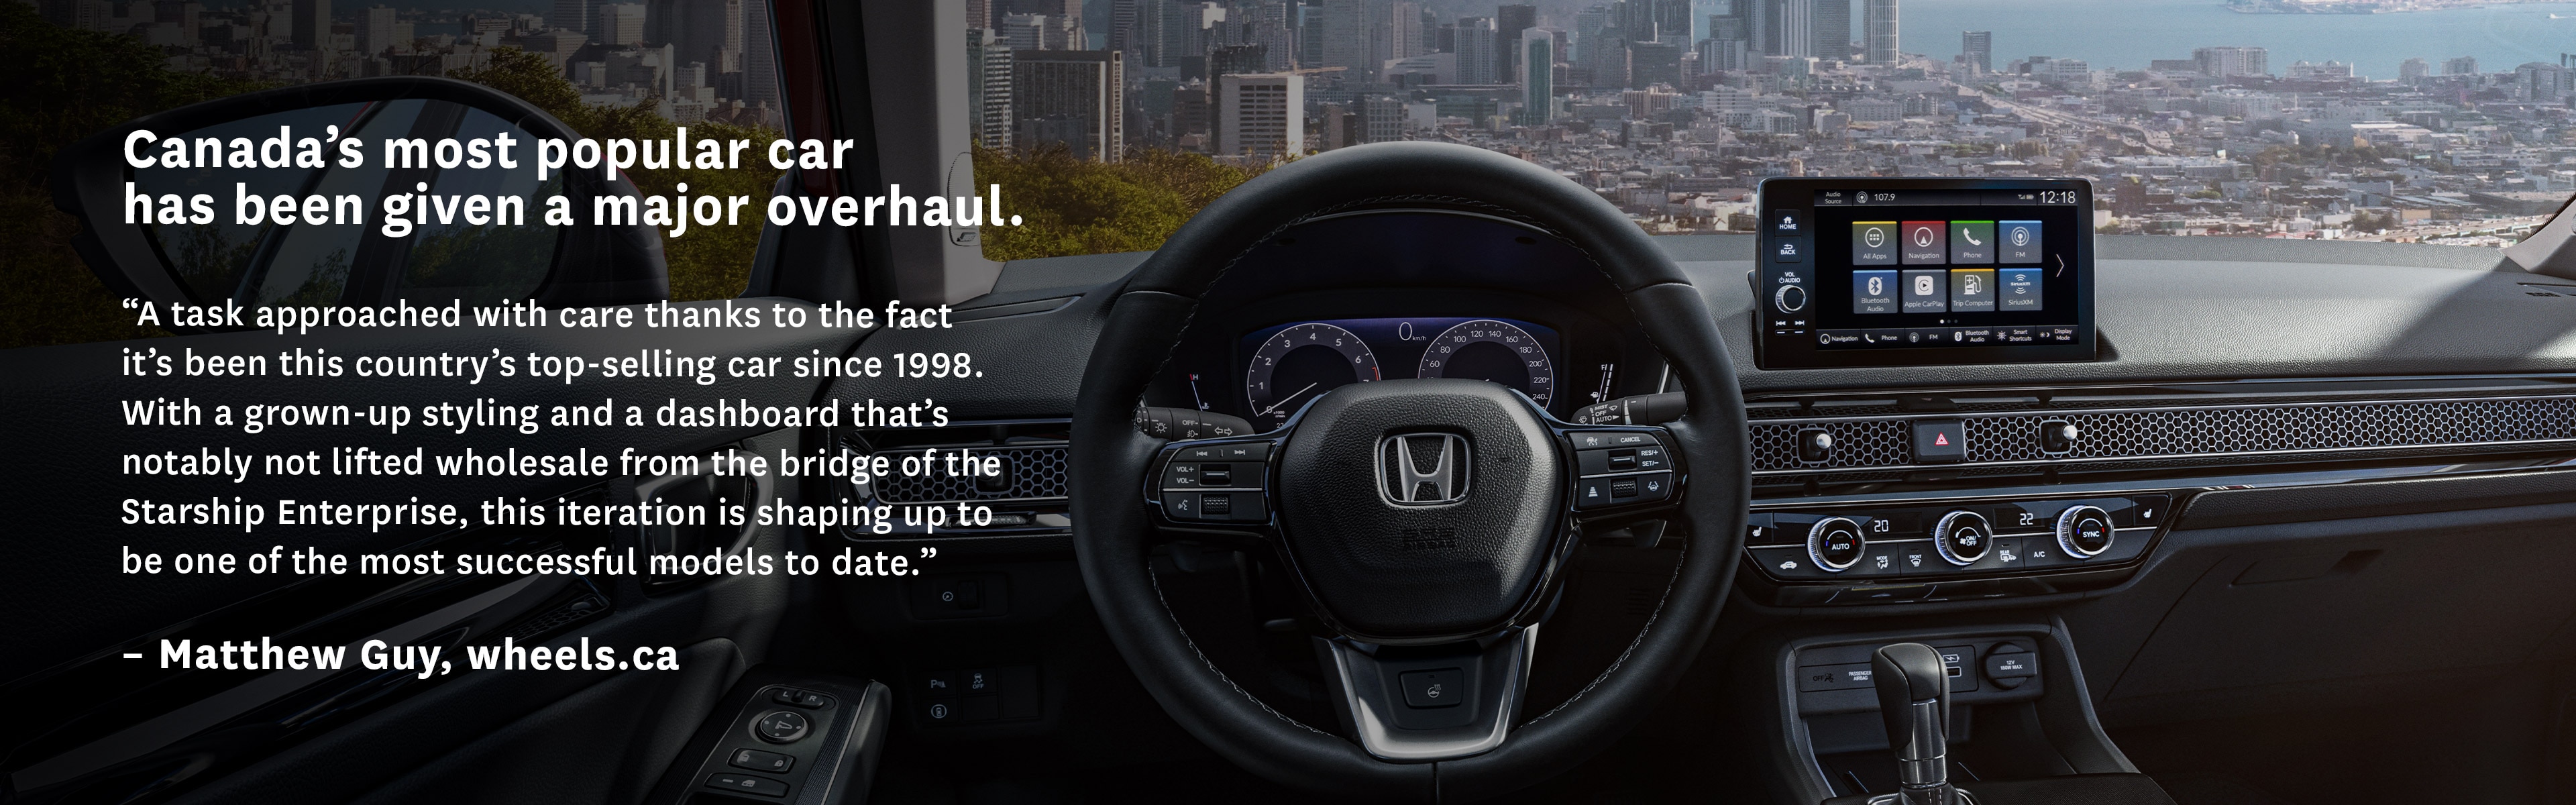 Interior cockpit of a 2022 Honda Civic from the driver’s point of view. The shot overlooks a city on a bay as seen through the windshield from atop a peak.